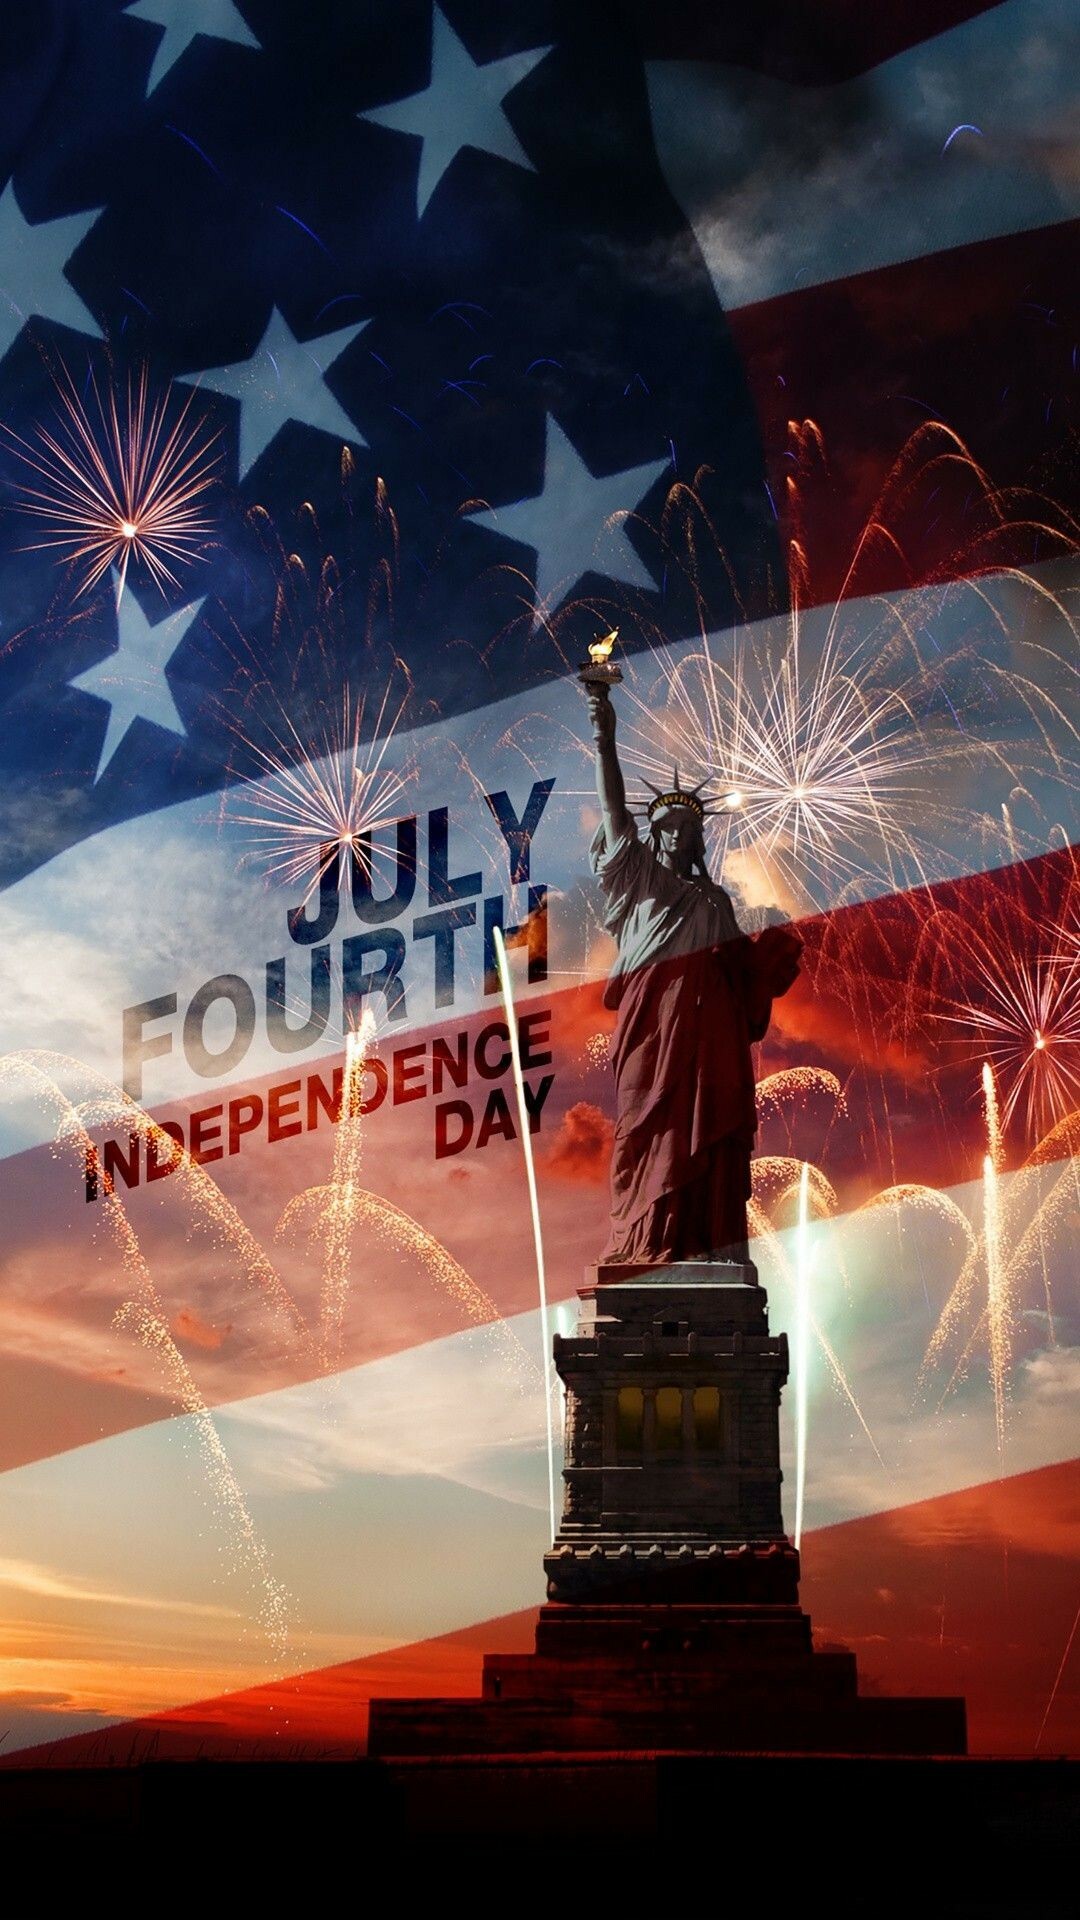 Independence Day (USA): 4th of July, Statue of Liberty, America's birthday. 1080x1920 Full HD Wallpaper.